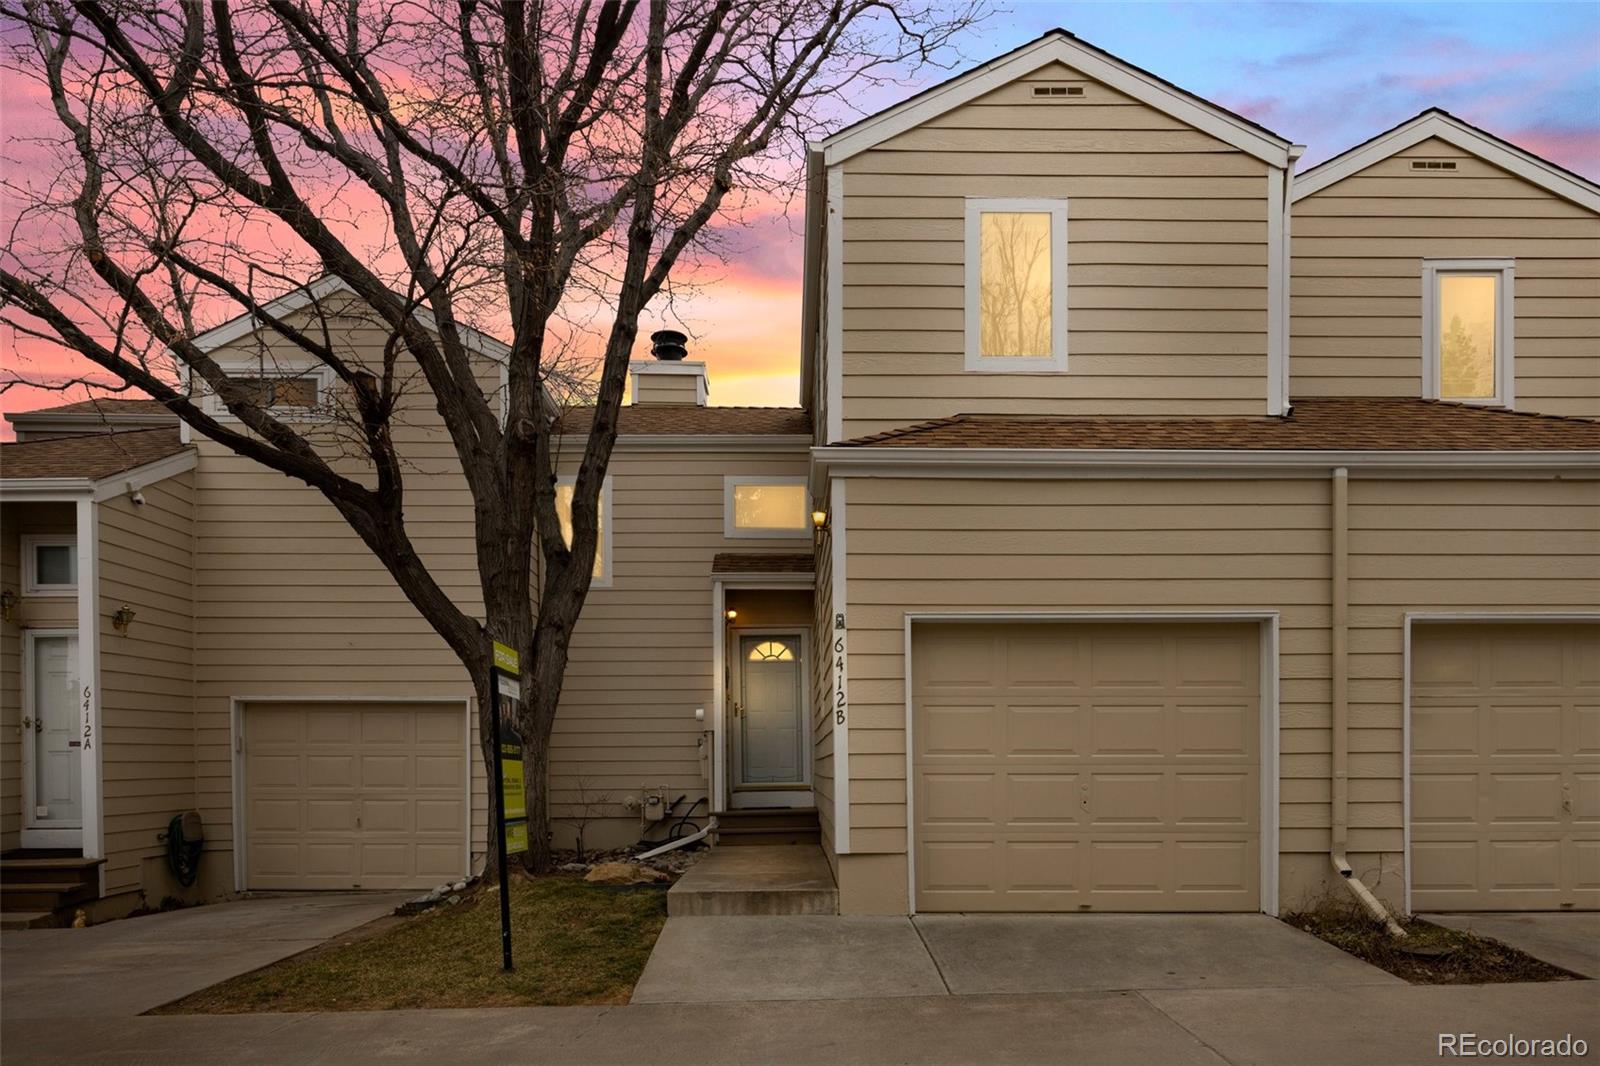 Report Image for 6412  Yank Court,Arvada, Colorado